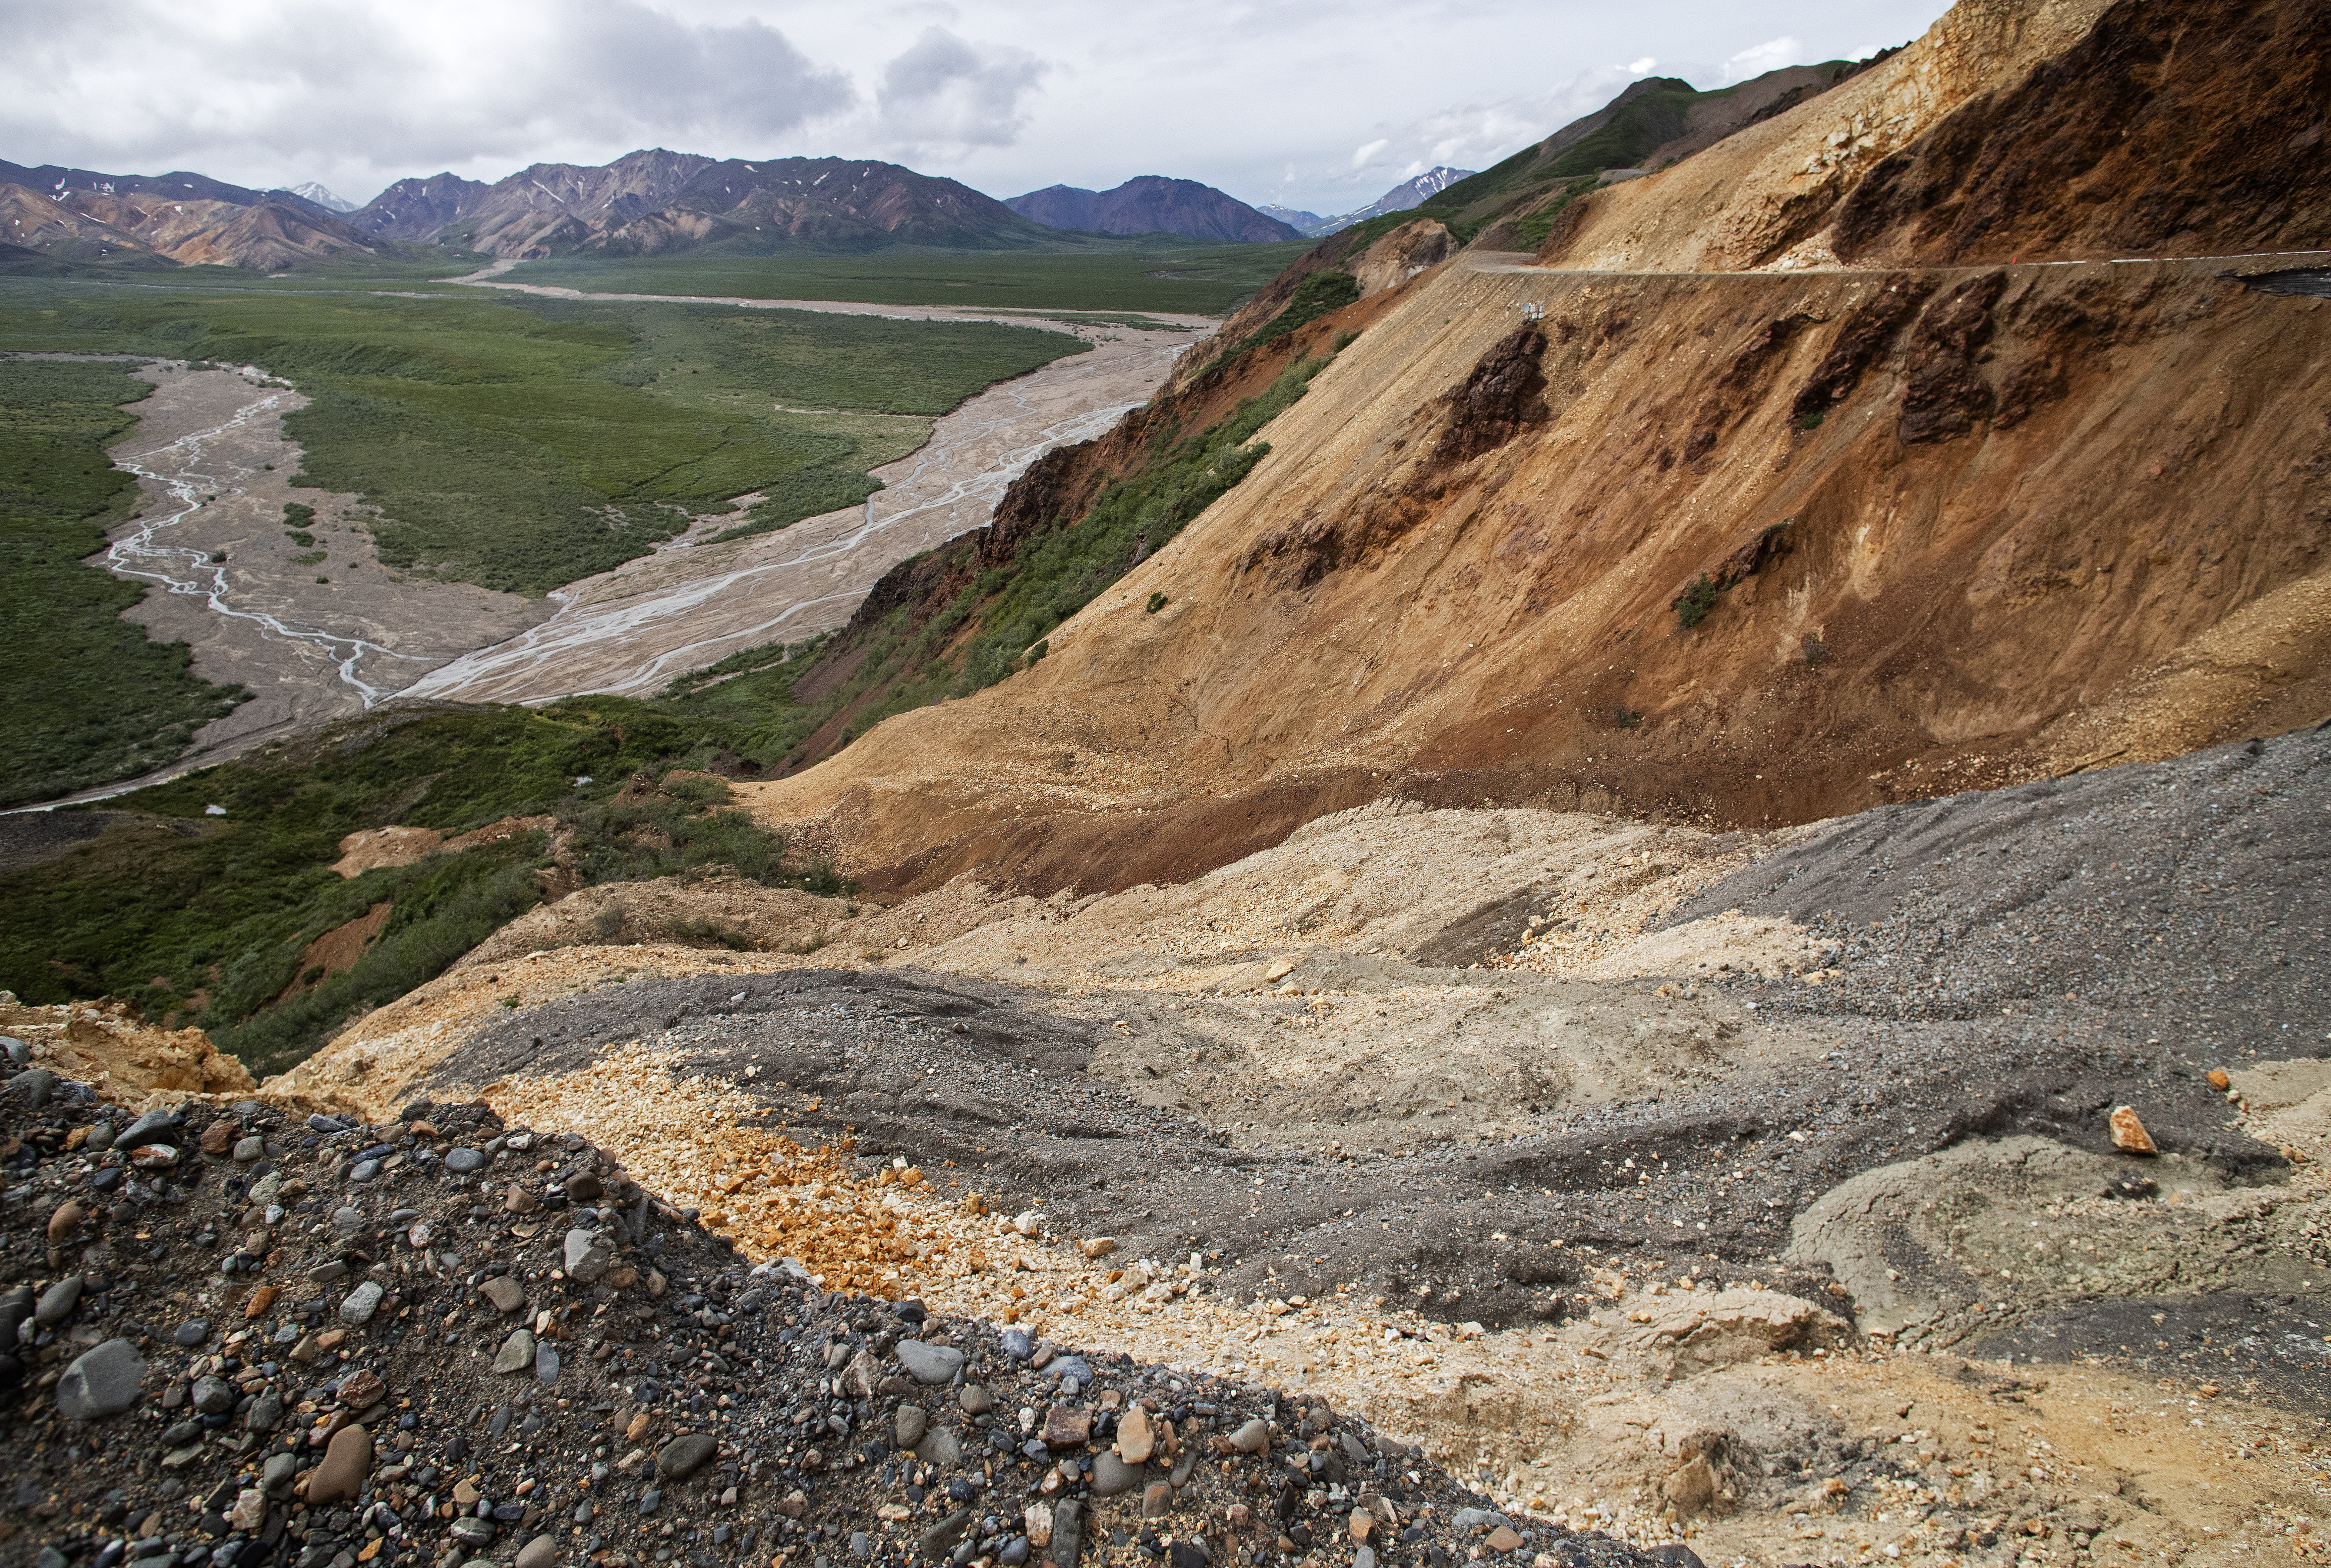 As the climate warms, the face of Denali National Park changes